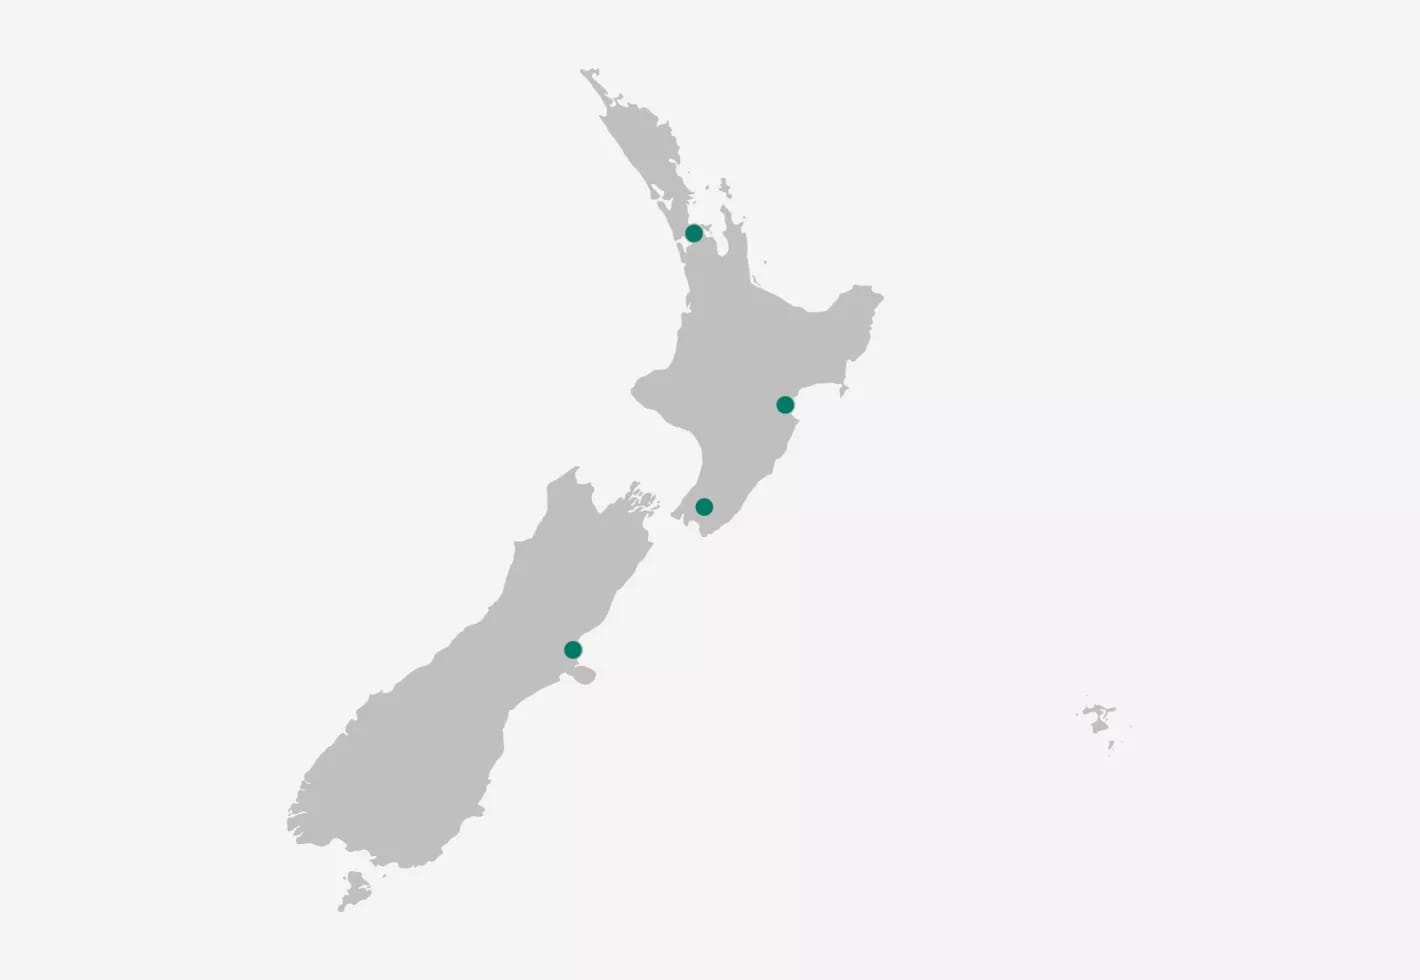 Our presence in New Zealand